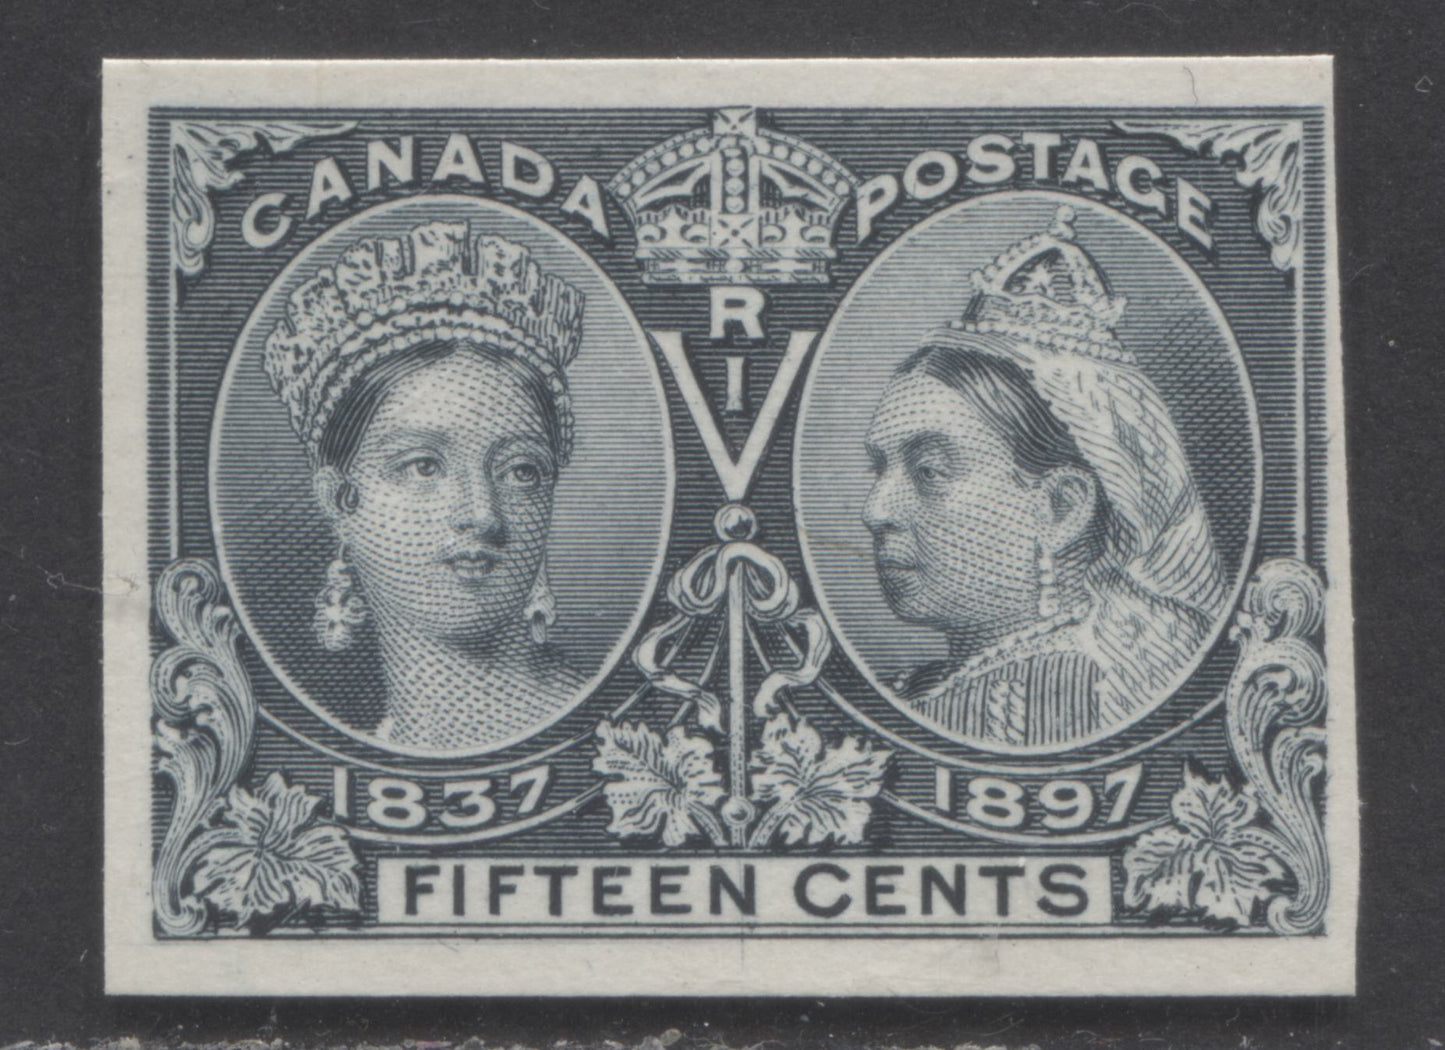 Lot 9 Canada #58P 15c Steel Blue Queen Victoria, 1897 Diamon Jubilee, A Fine Unused Plate Proof Single With Vertical Scratch Through N Of 'Cents' & Mark In 'PO' Of Postage, Only 600 Printed